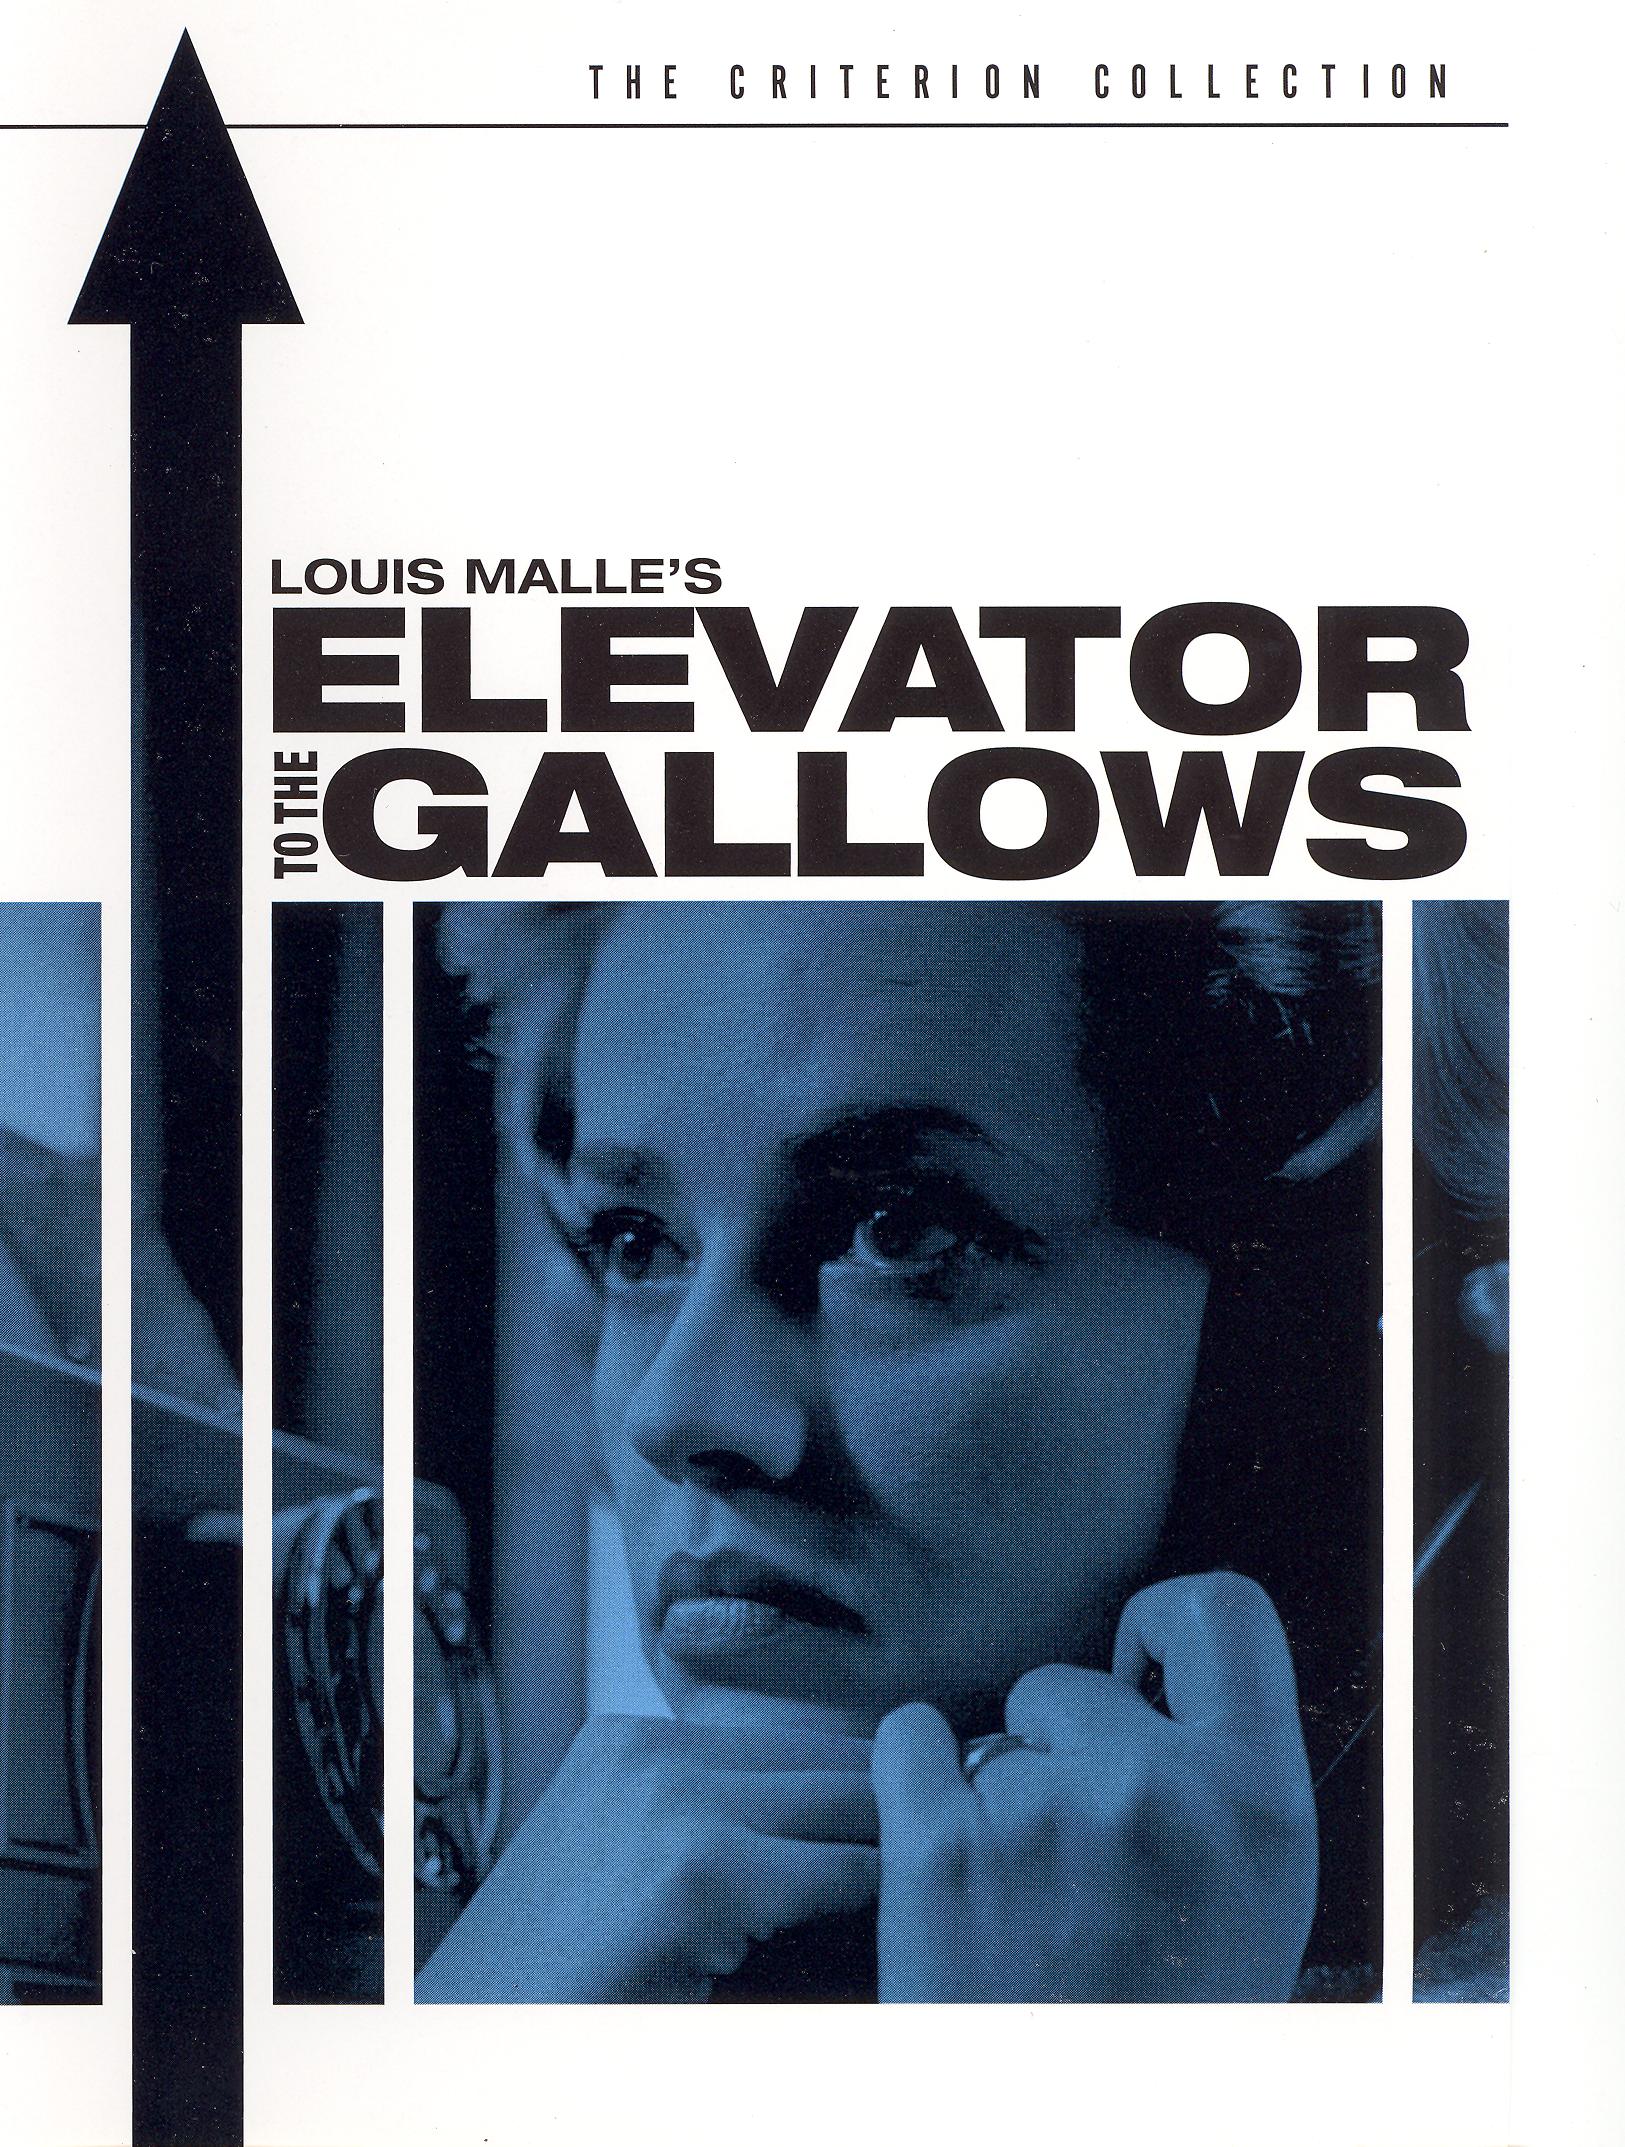 3 Films by Louis Malle  The Criterion Collection